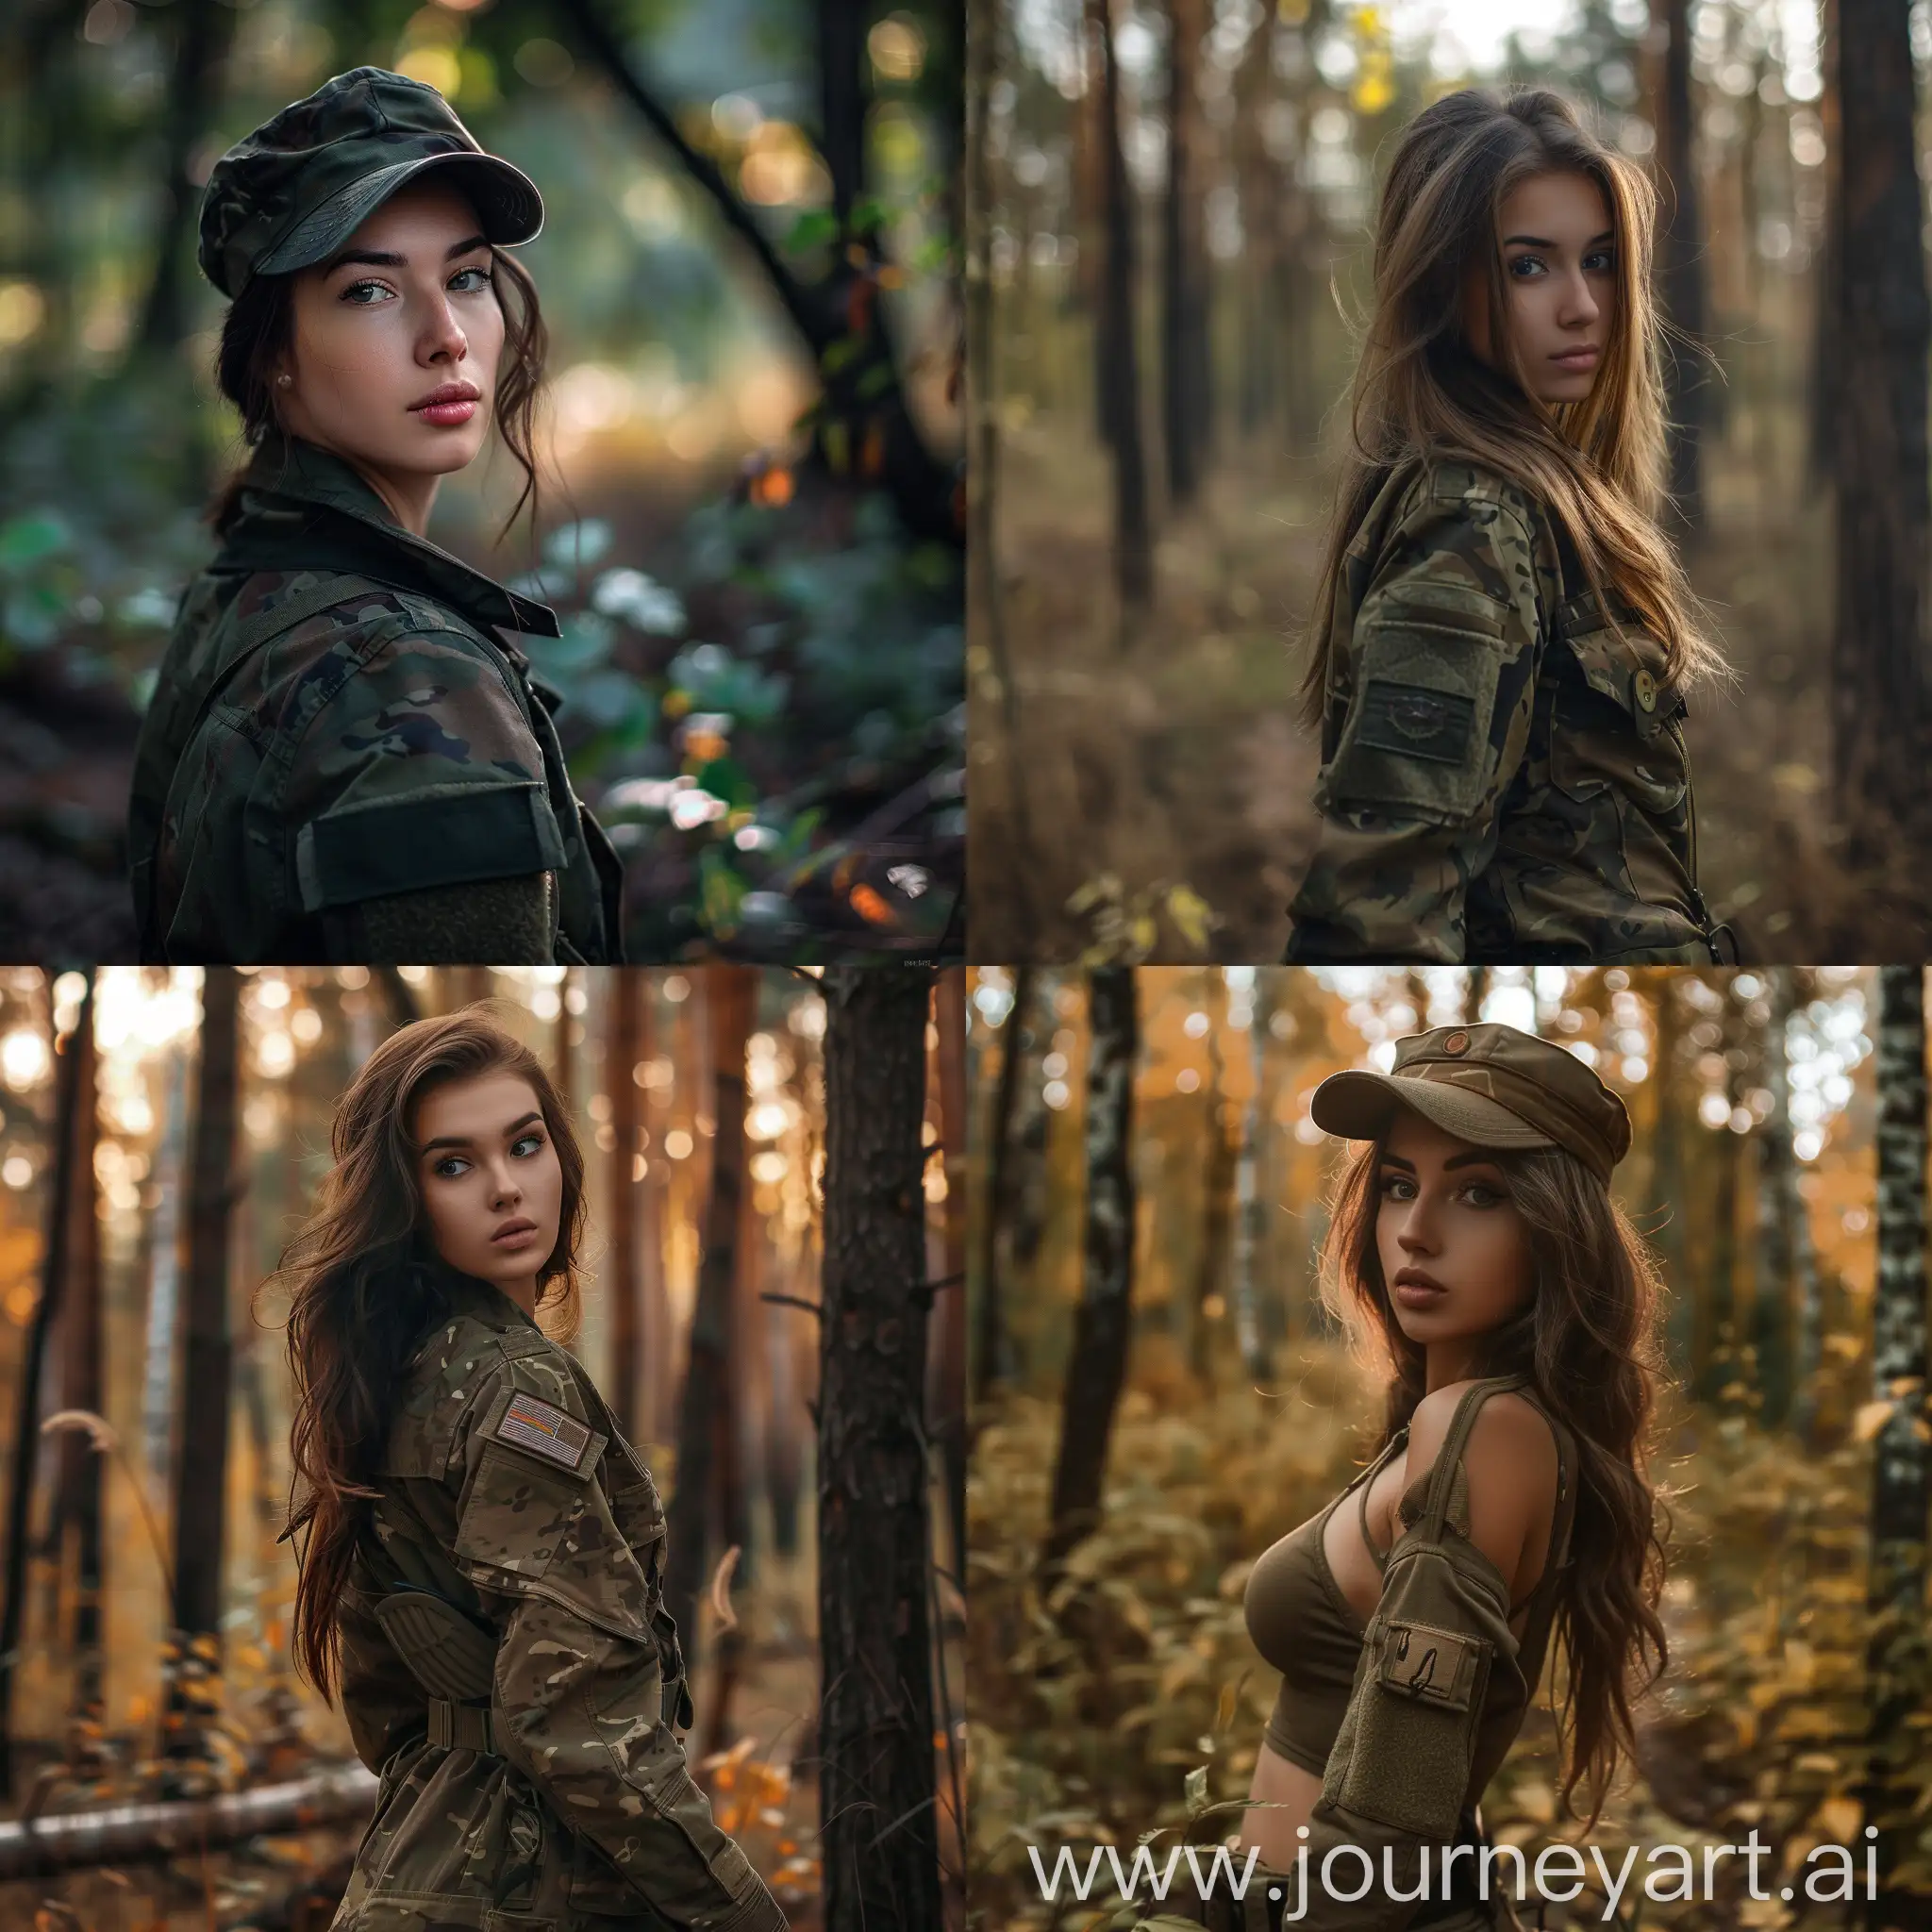 A mbeautiful military woman in a forest